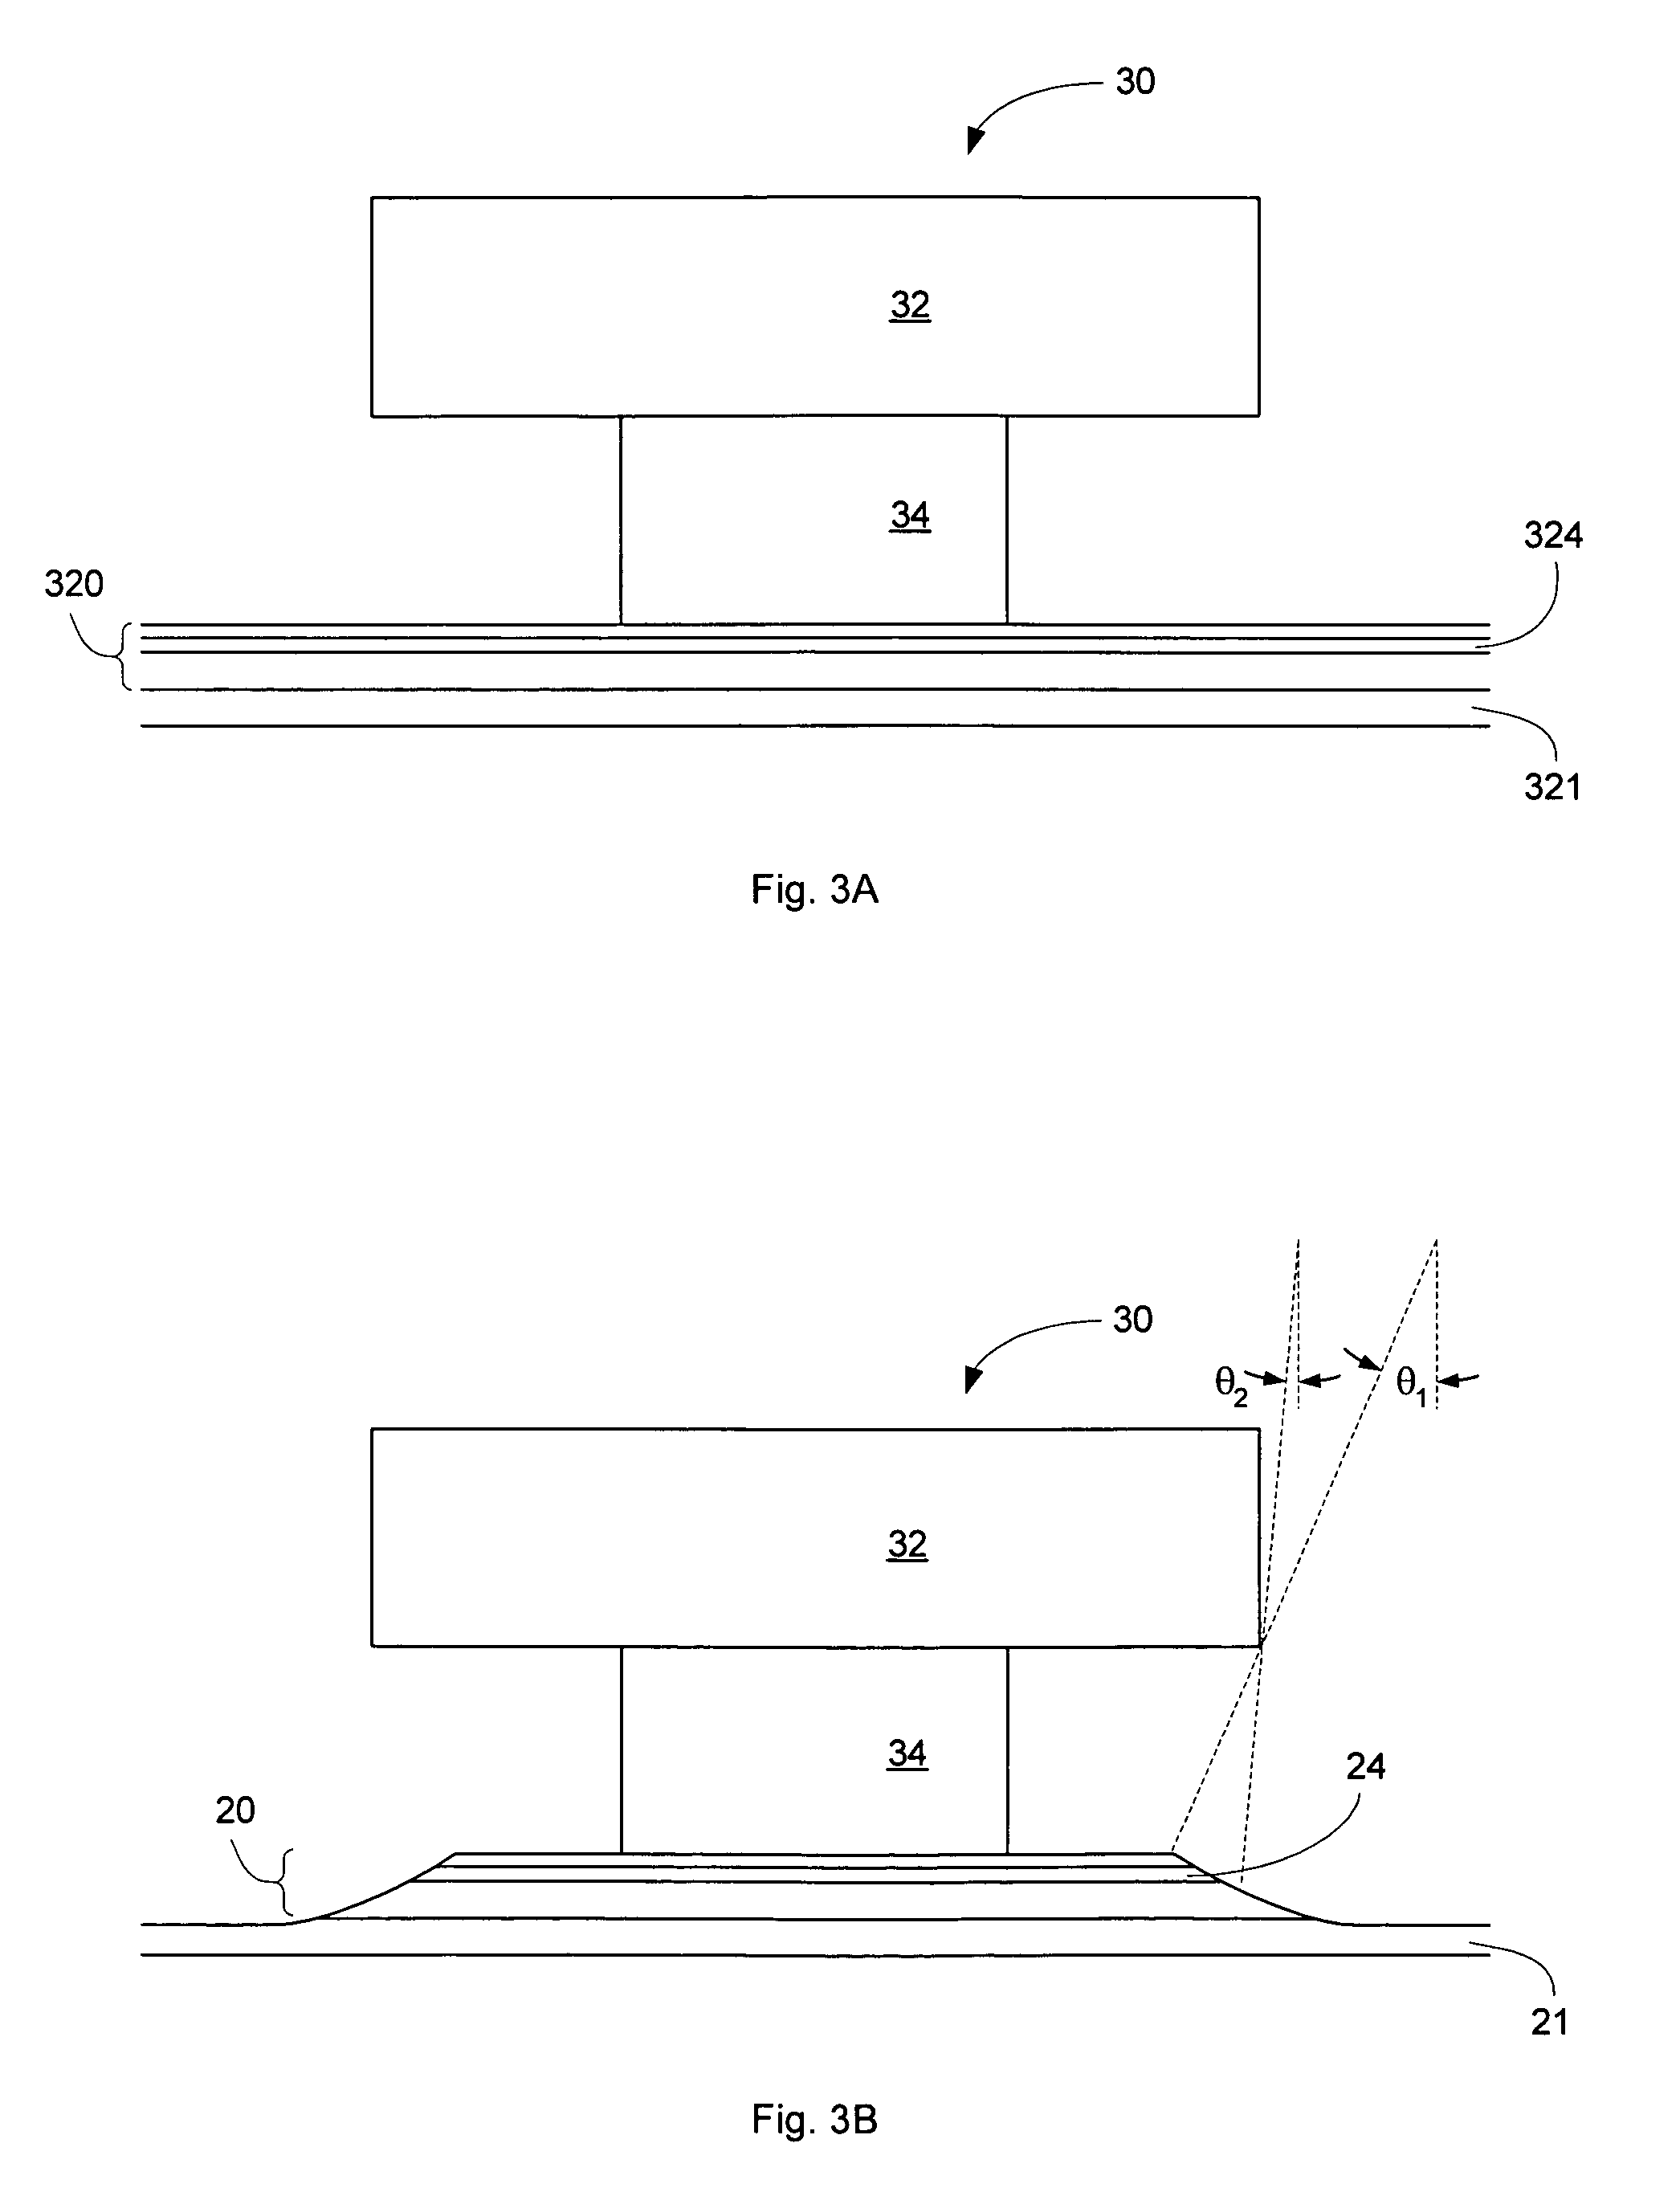 Method for forming a hard bias structure in a magnetoresistive sensor